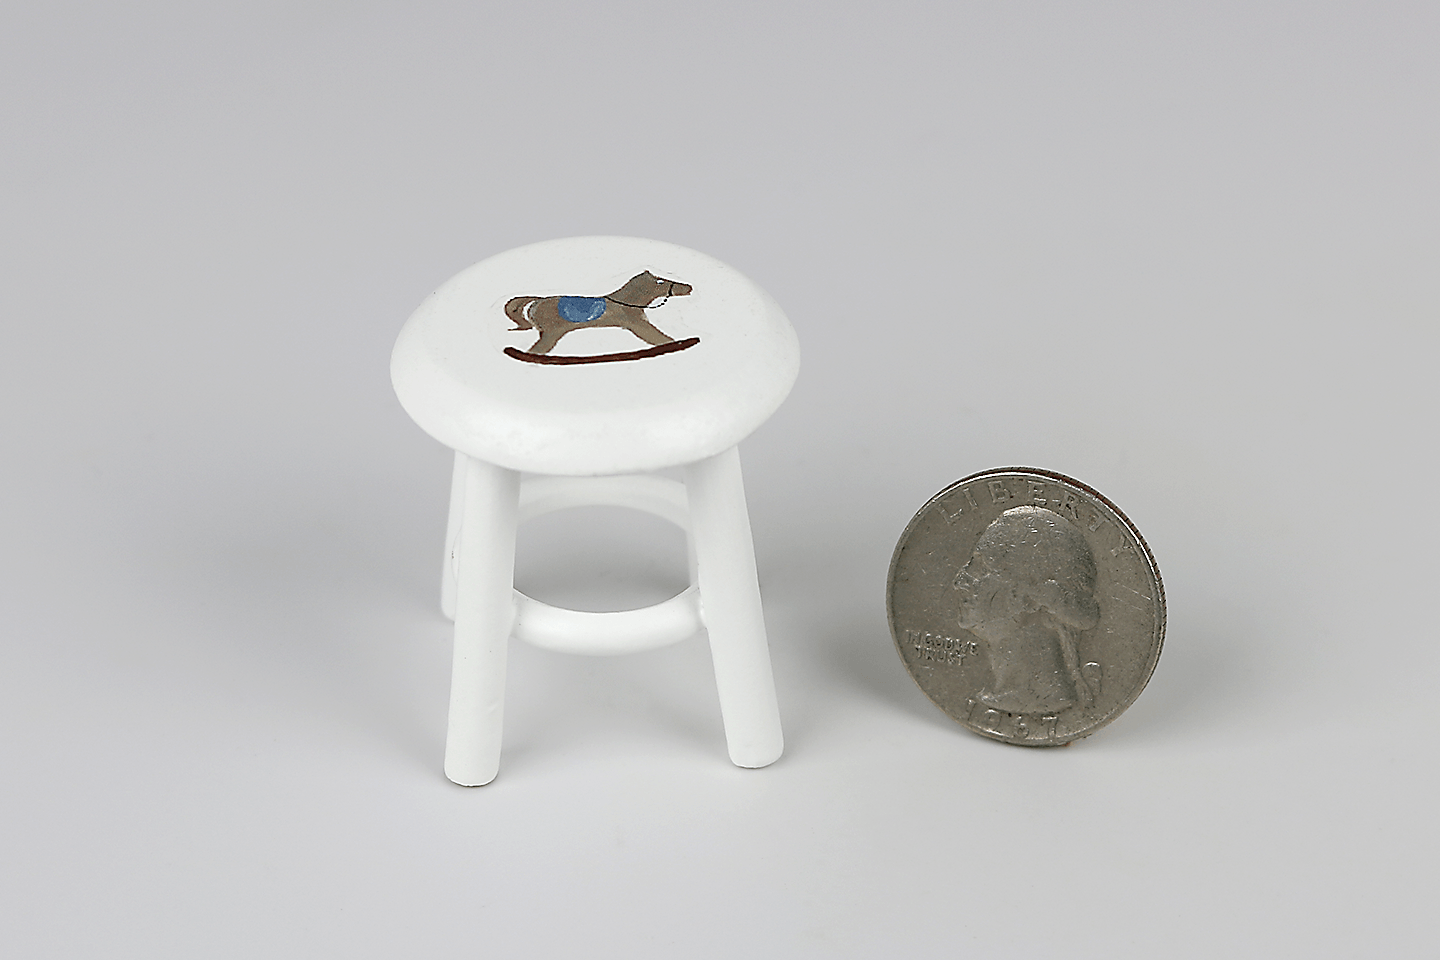 Small Stool with Rocking Horse Decal